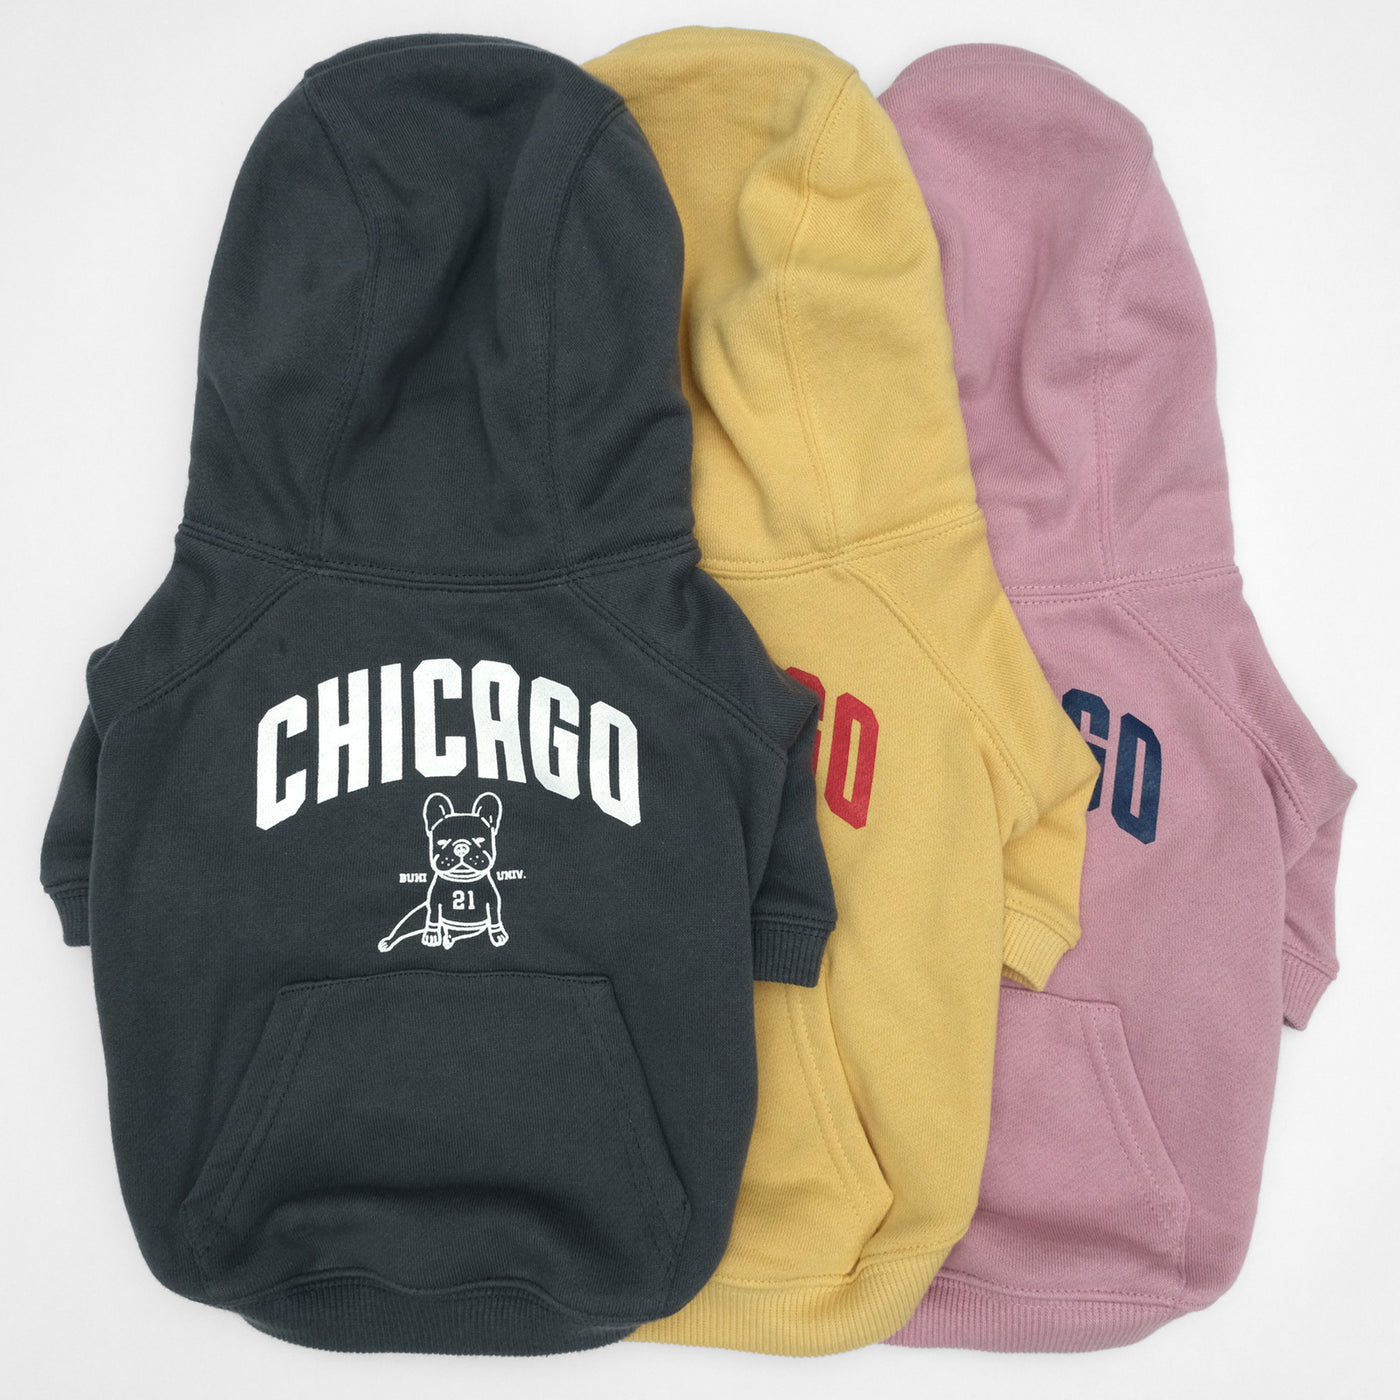 CHICAGO College Hoodie